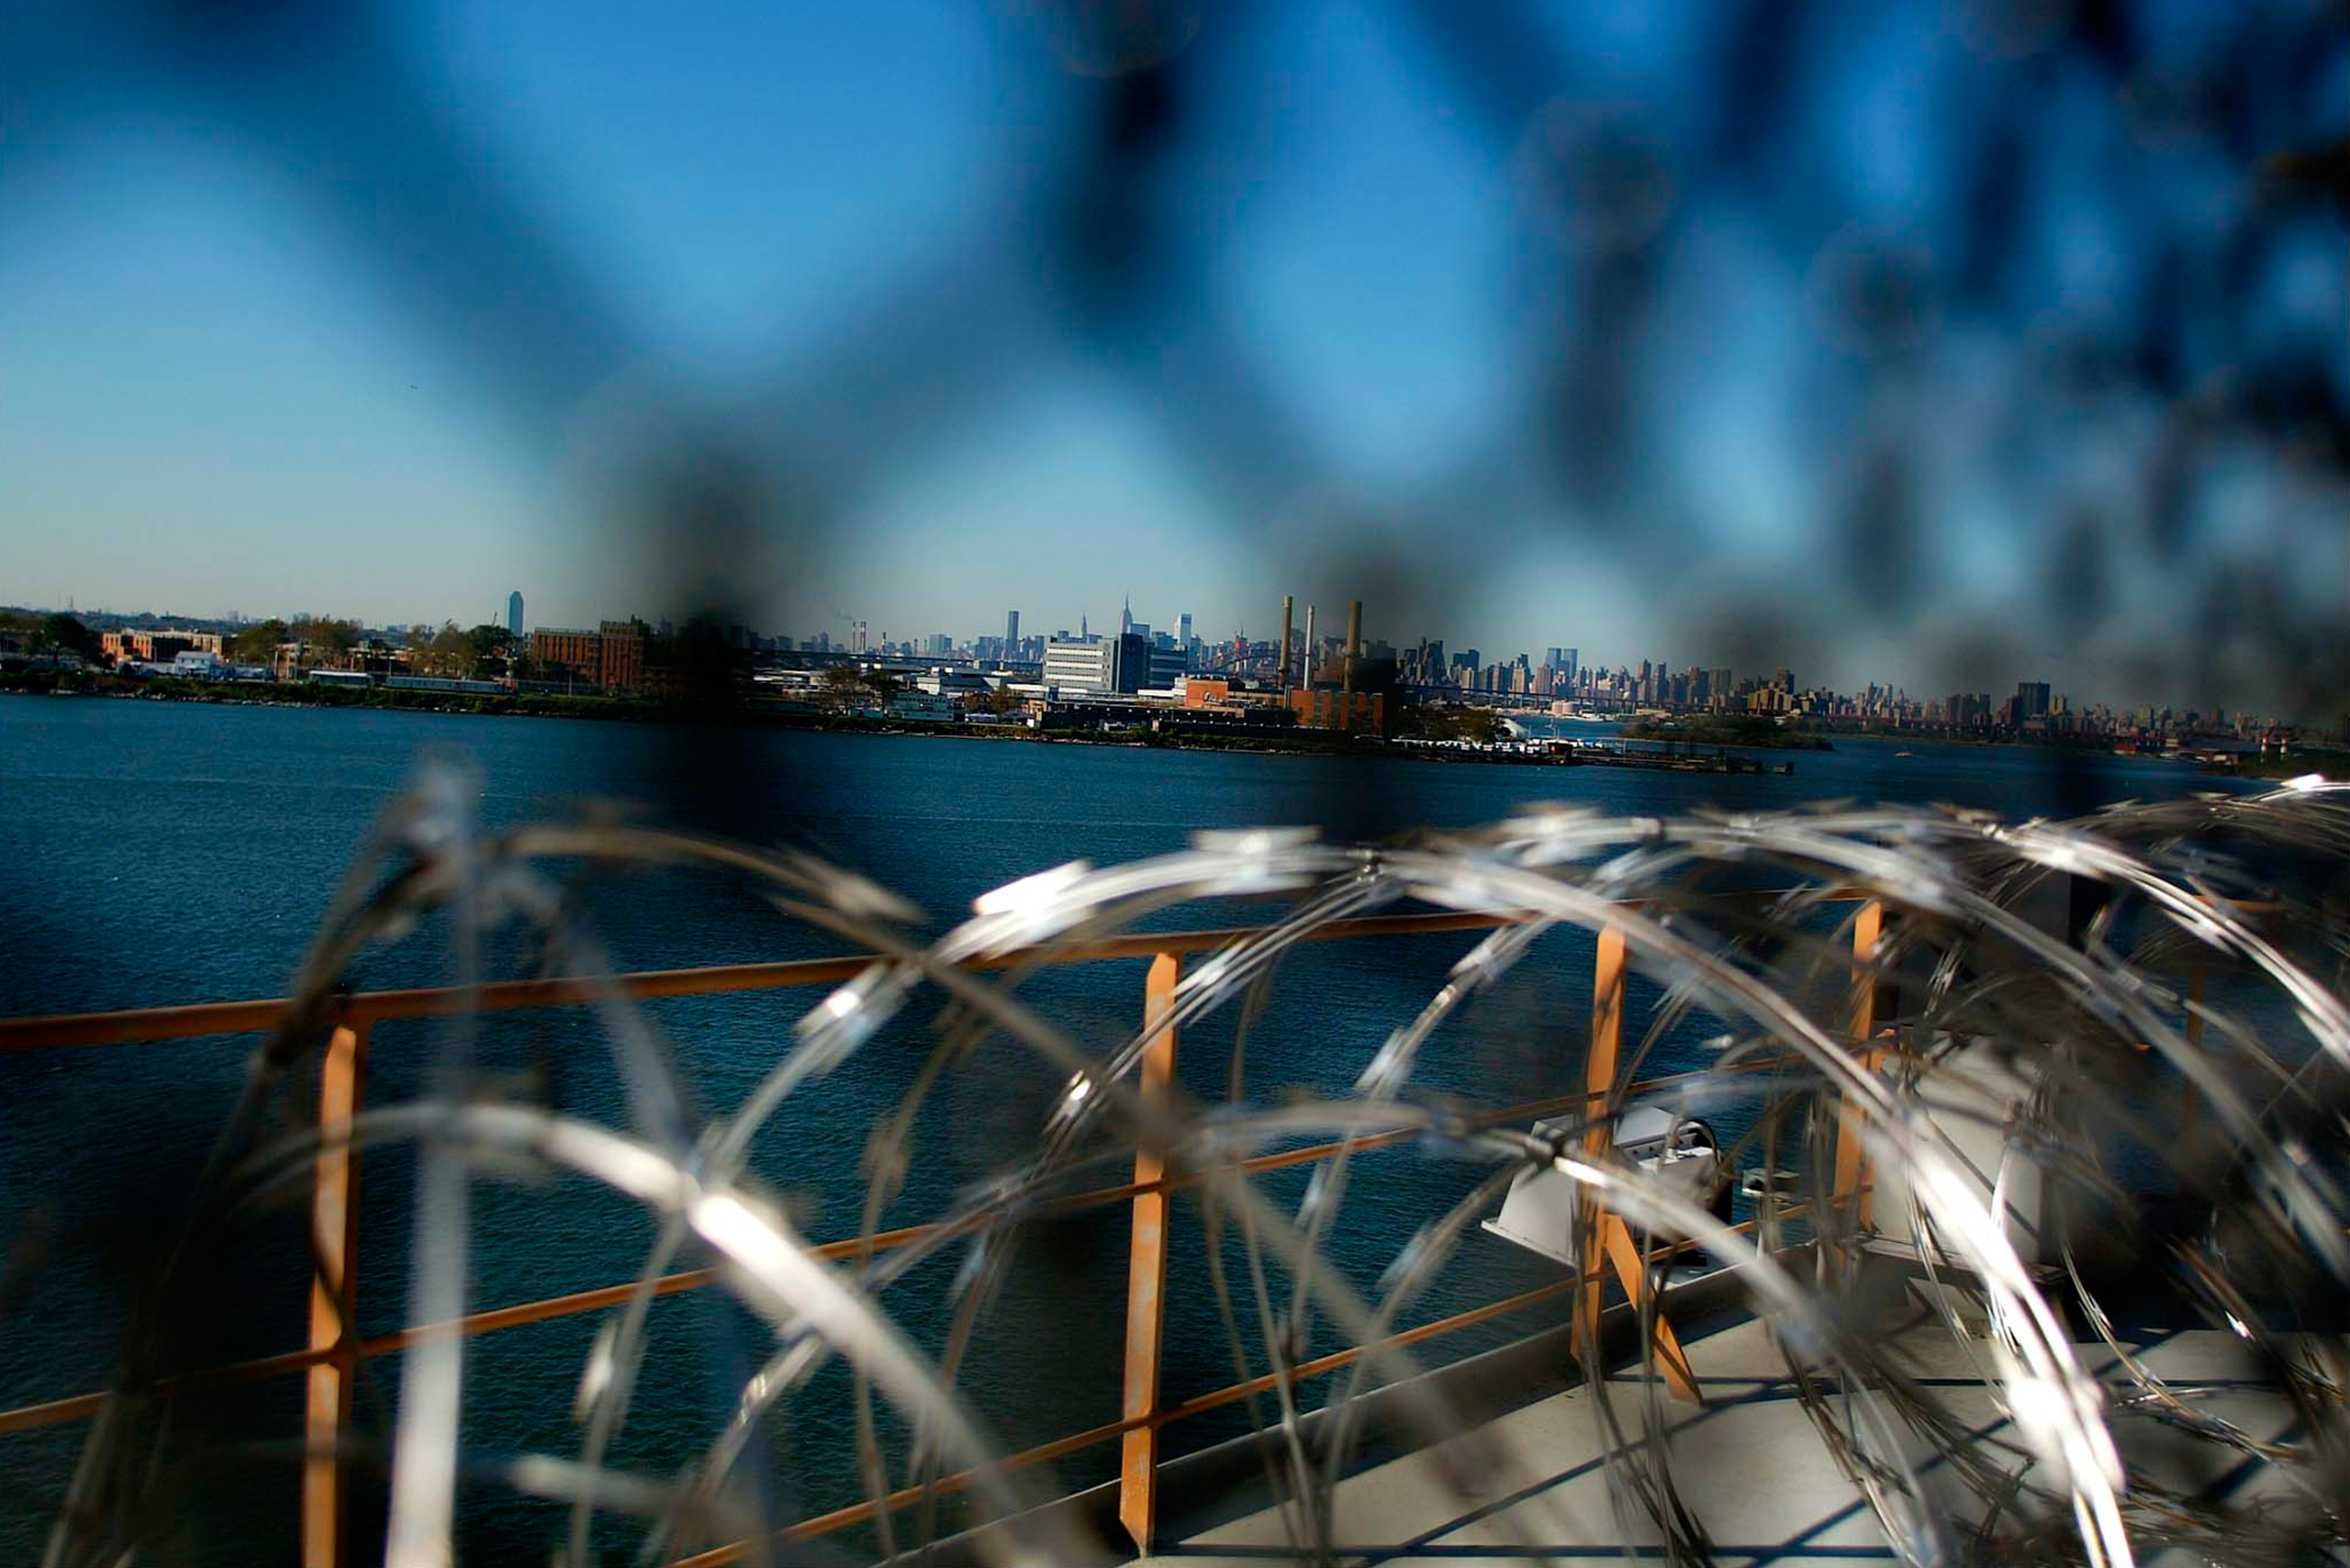 View of Manhattan from the Vernon C. Bain Correctional Center at Rikers Island, in the Bronx. (David Howells—Corbis/Getty Images)